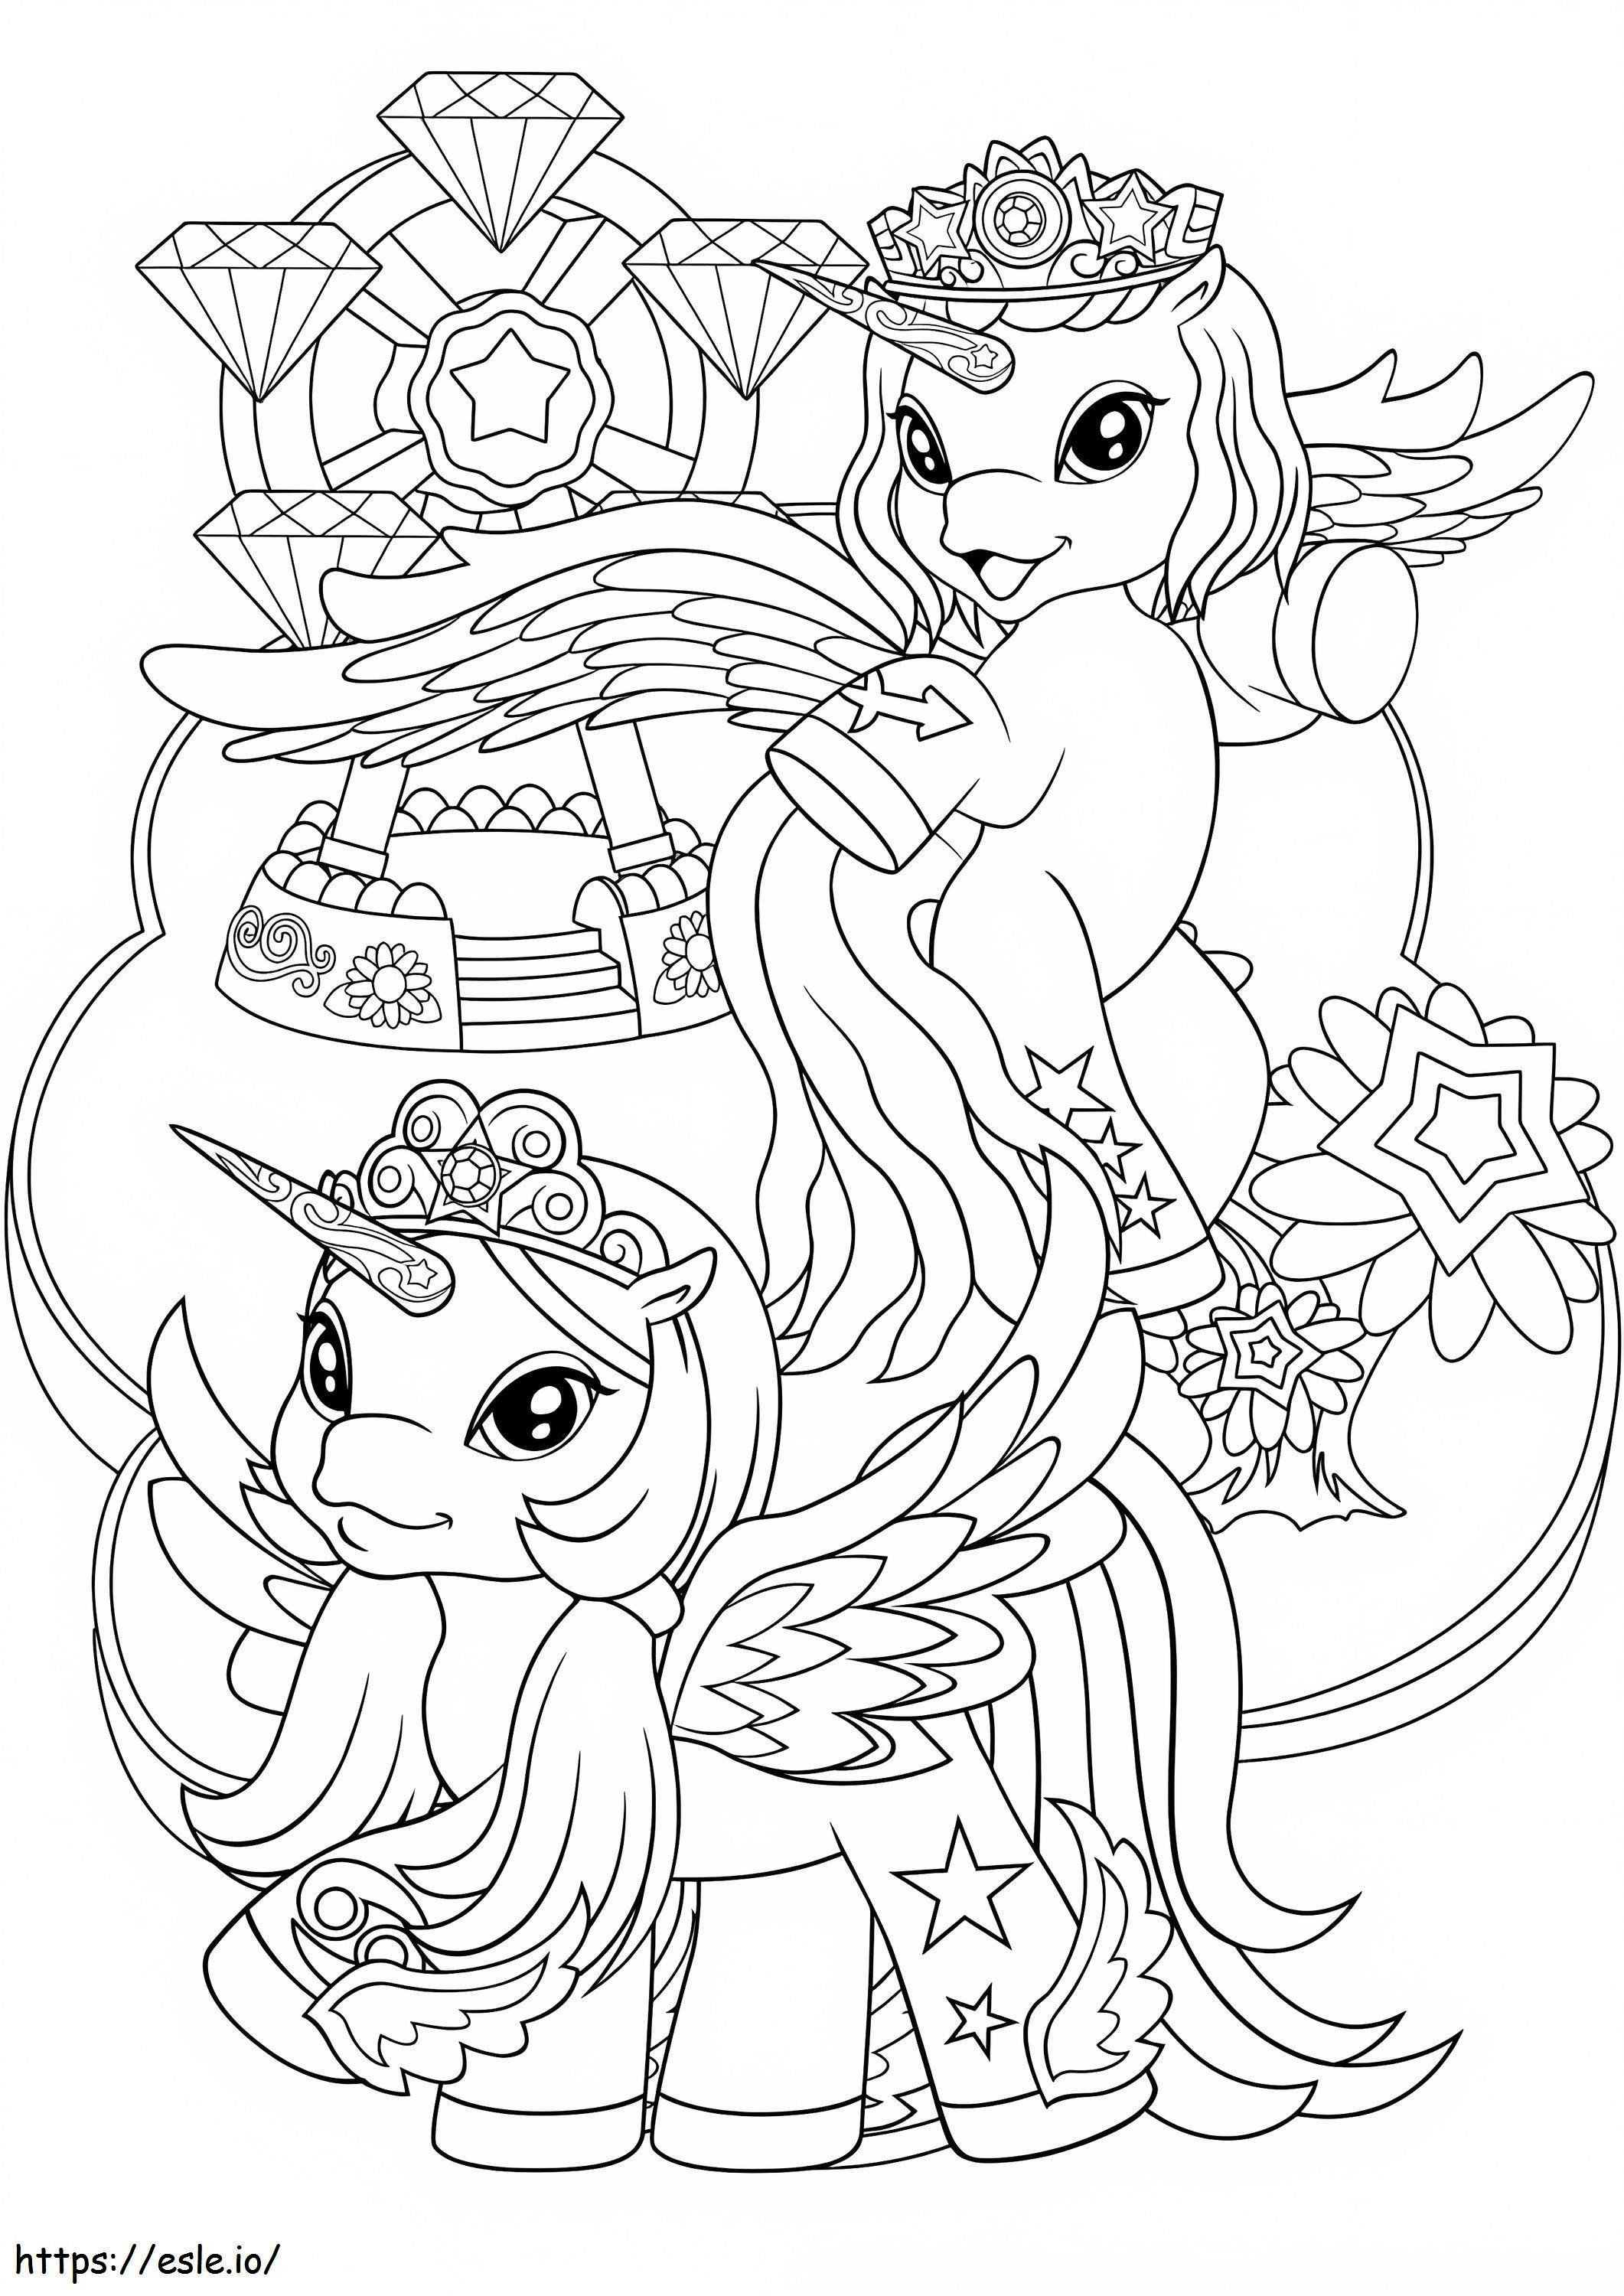 Filly Funtasia 3 coloring page